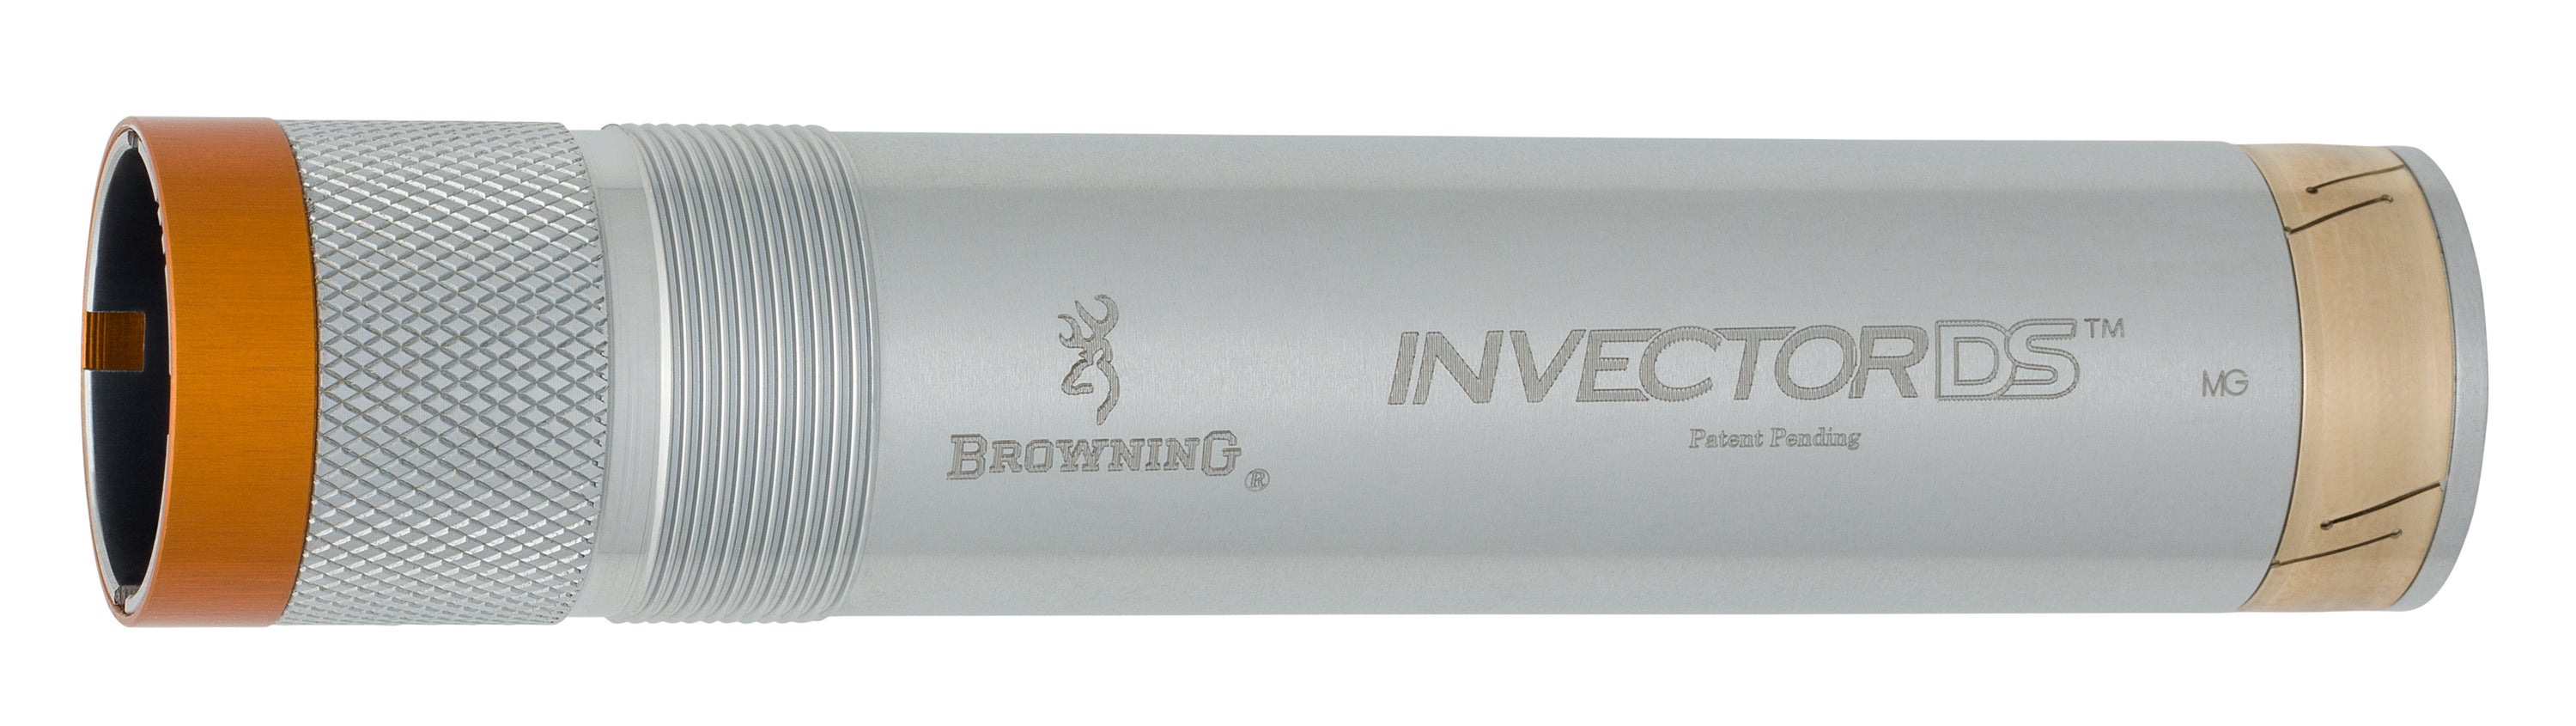 Ga Invector DS Extended Choke Tubes Browning